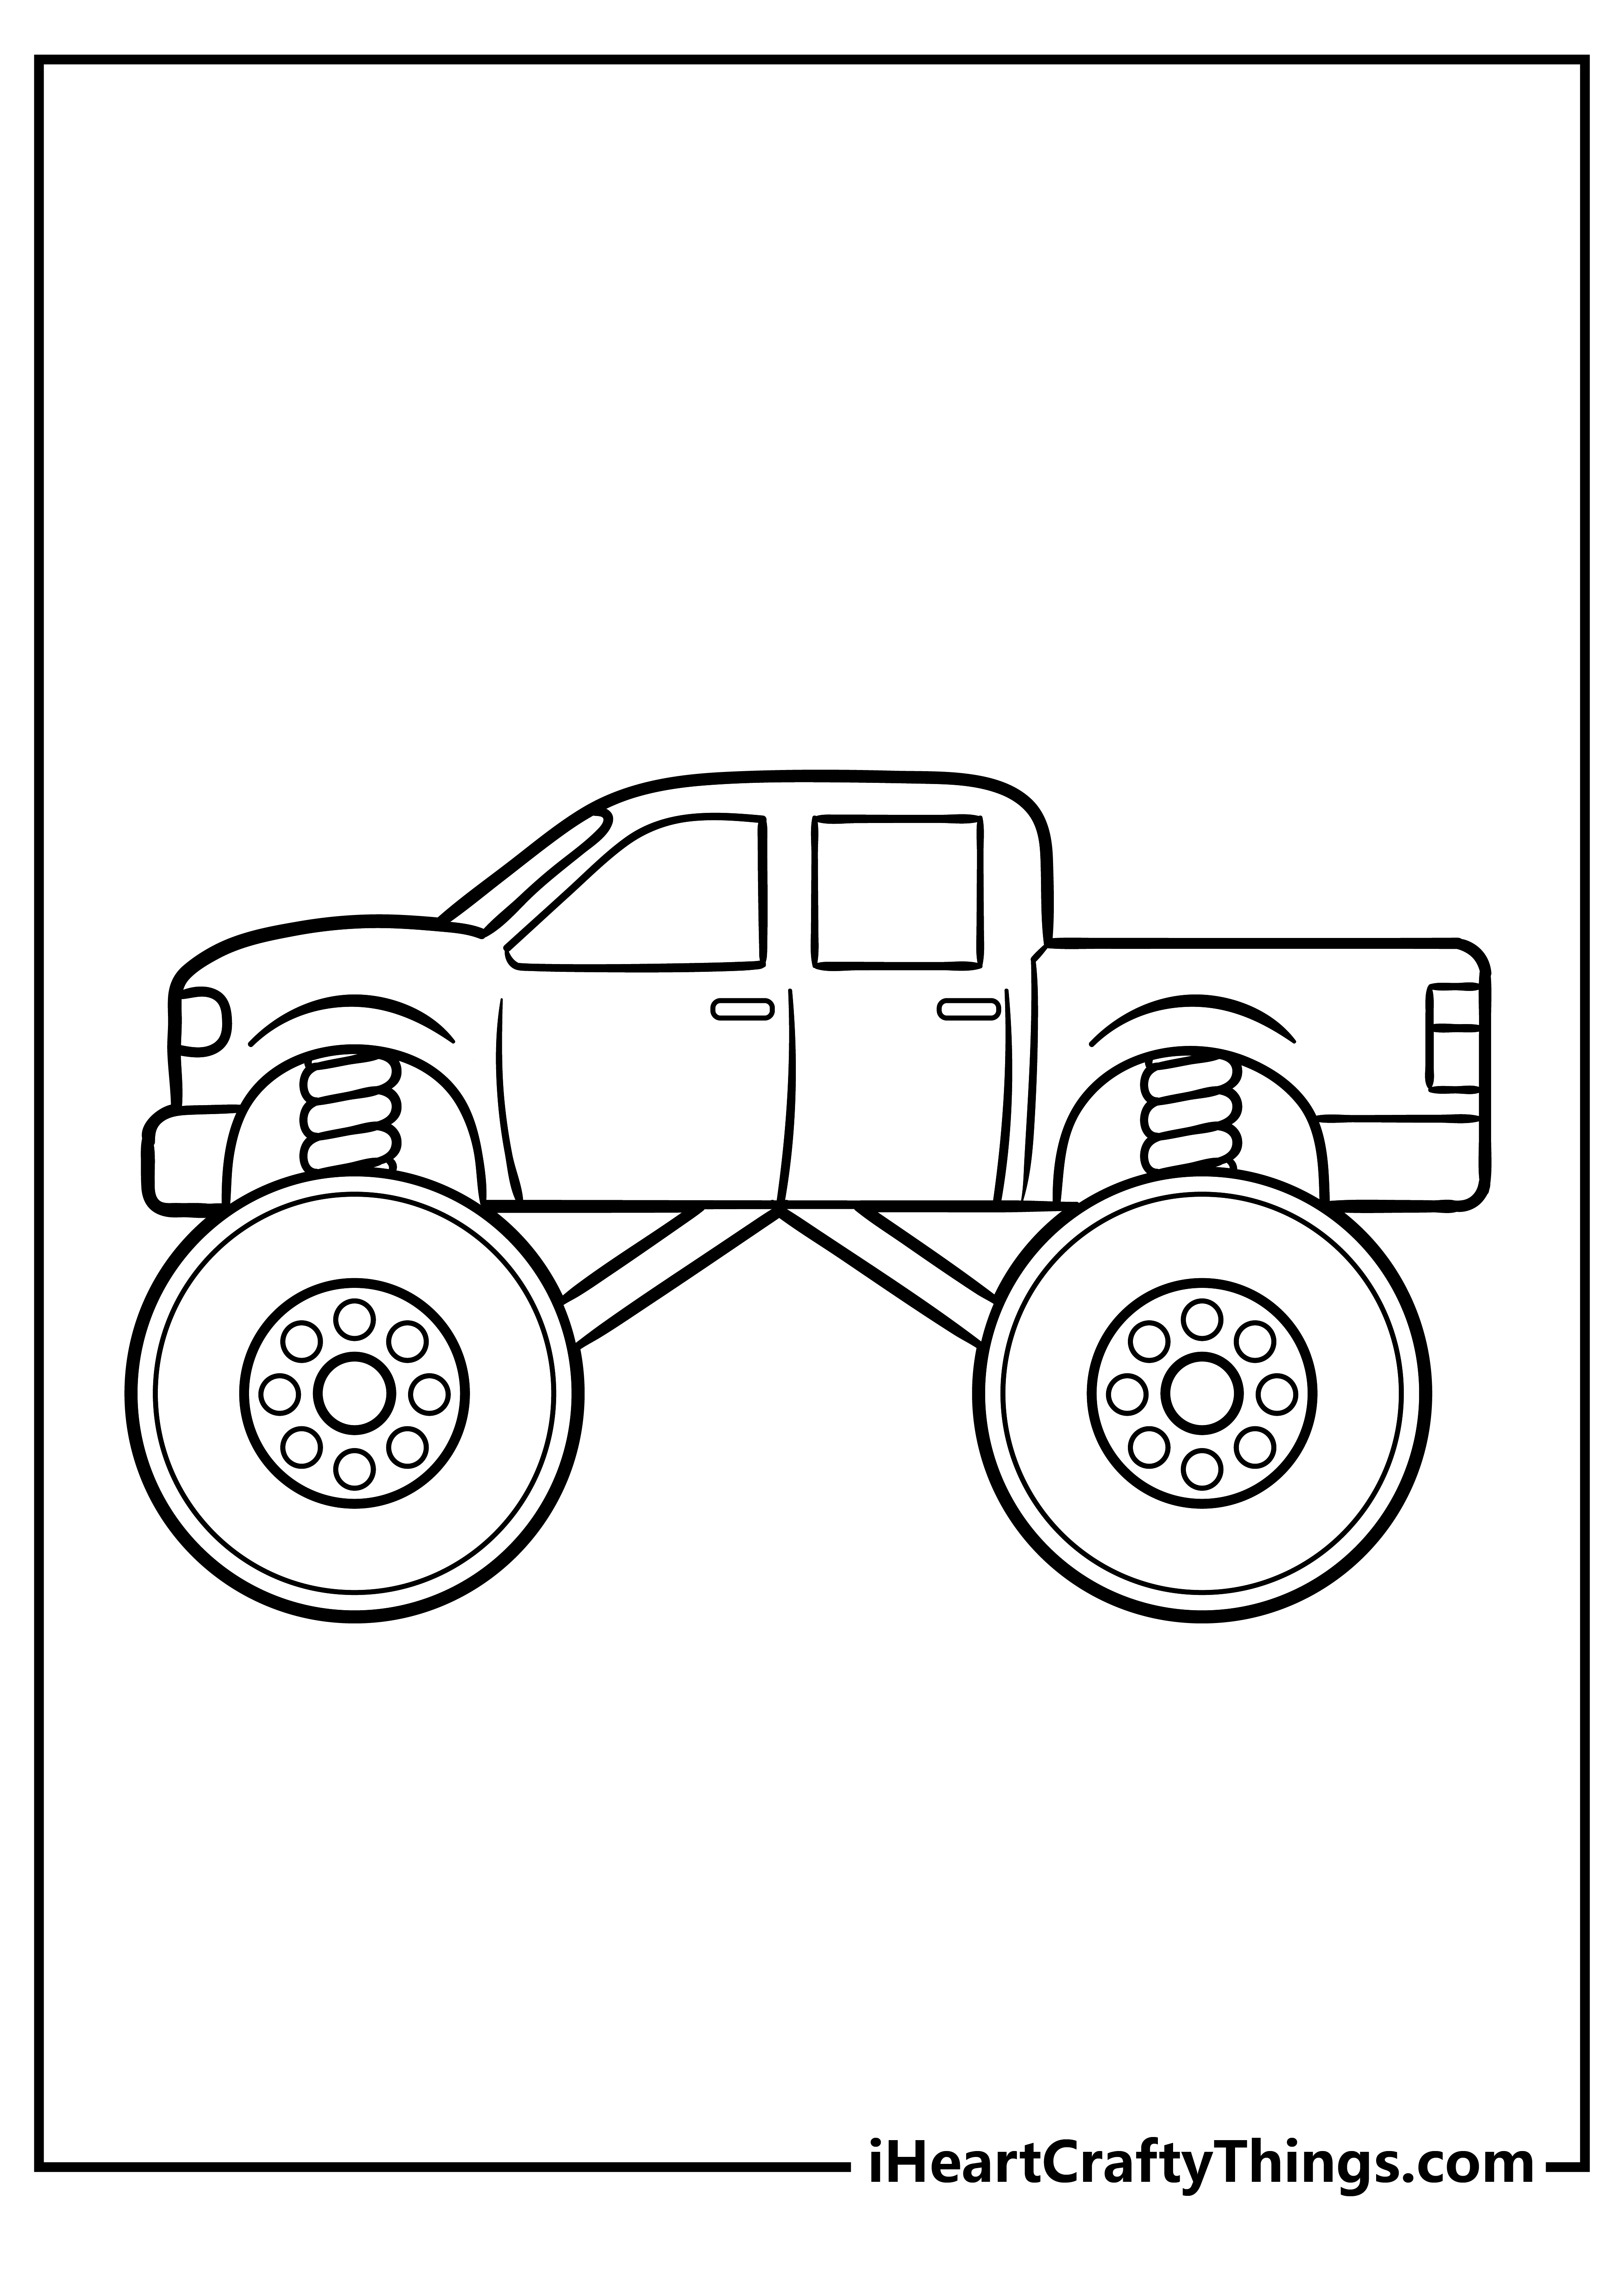 Monster truck coloring pages free printables